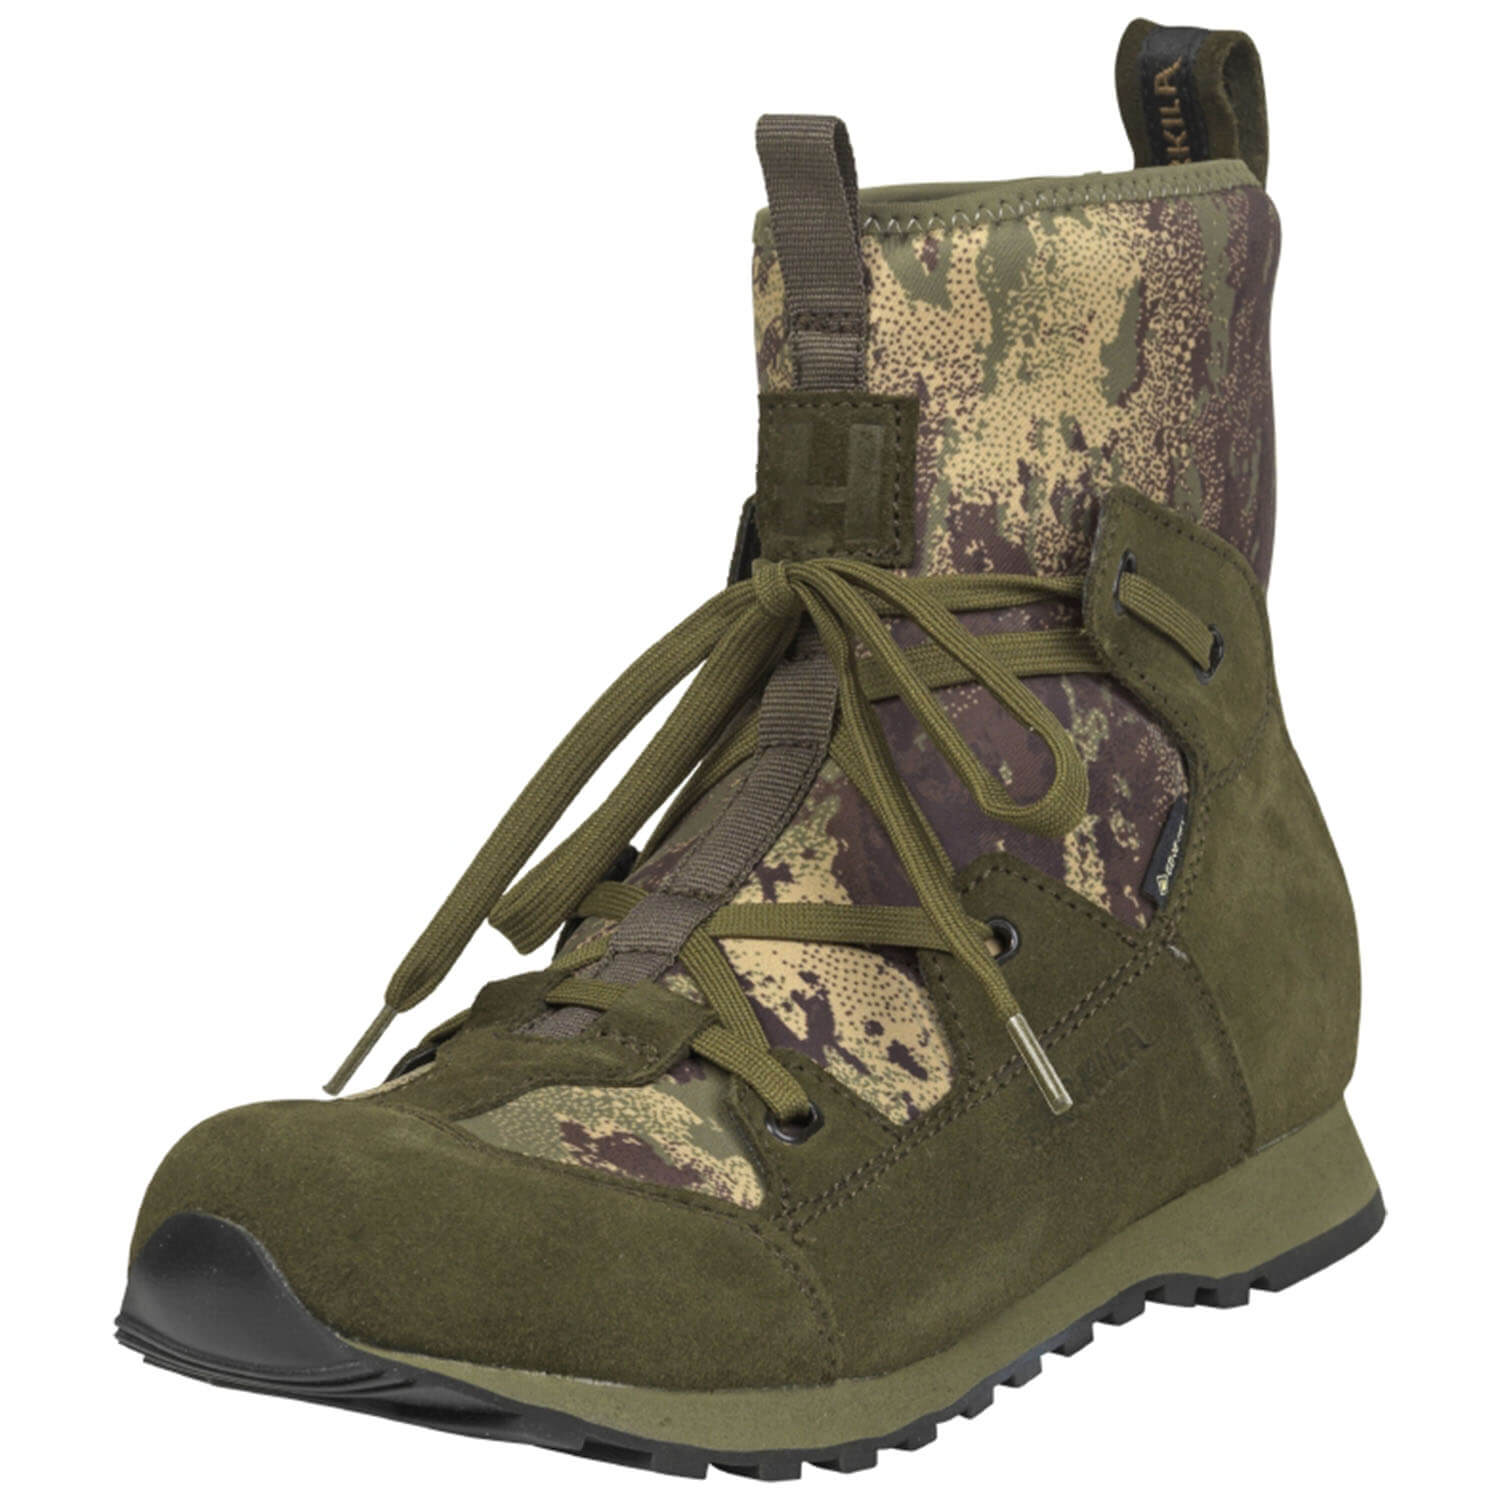 Härkila Stalking Boots Stalking GTX (Axis msp forest) - Hunting Boots